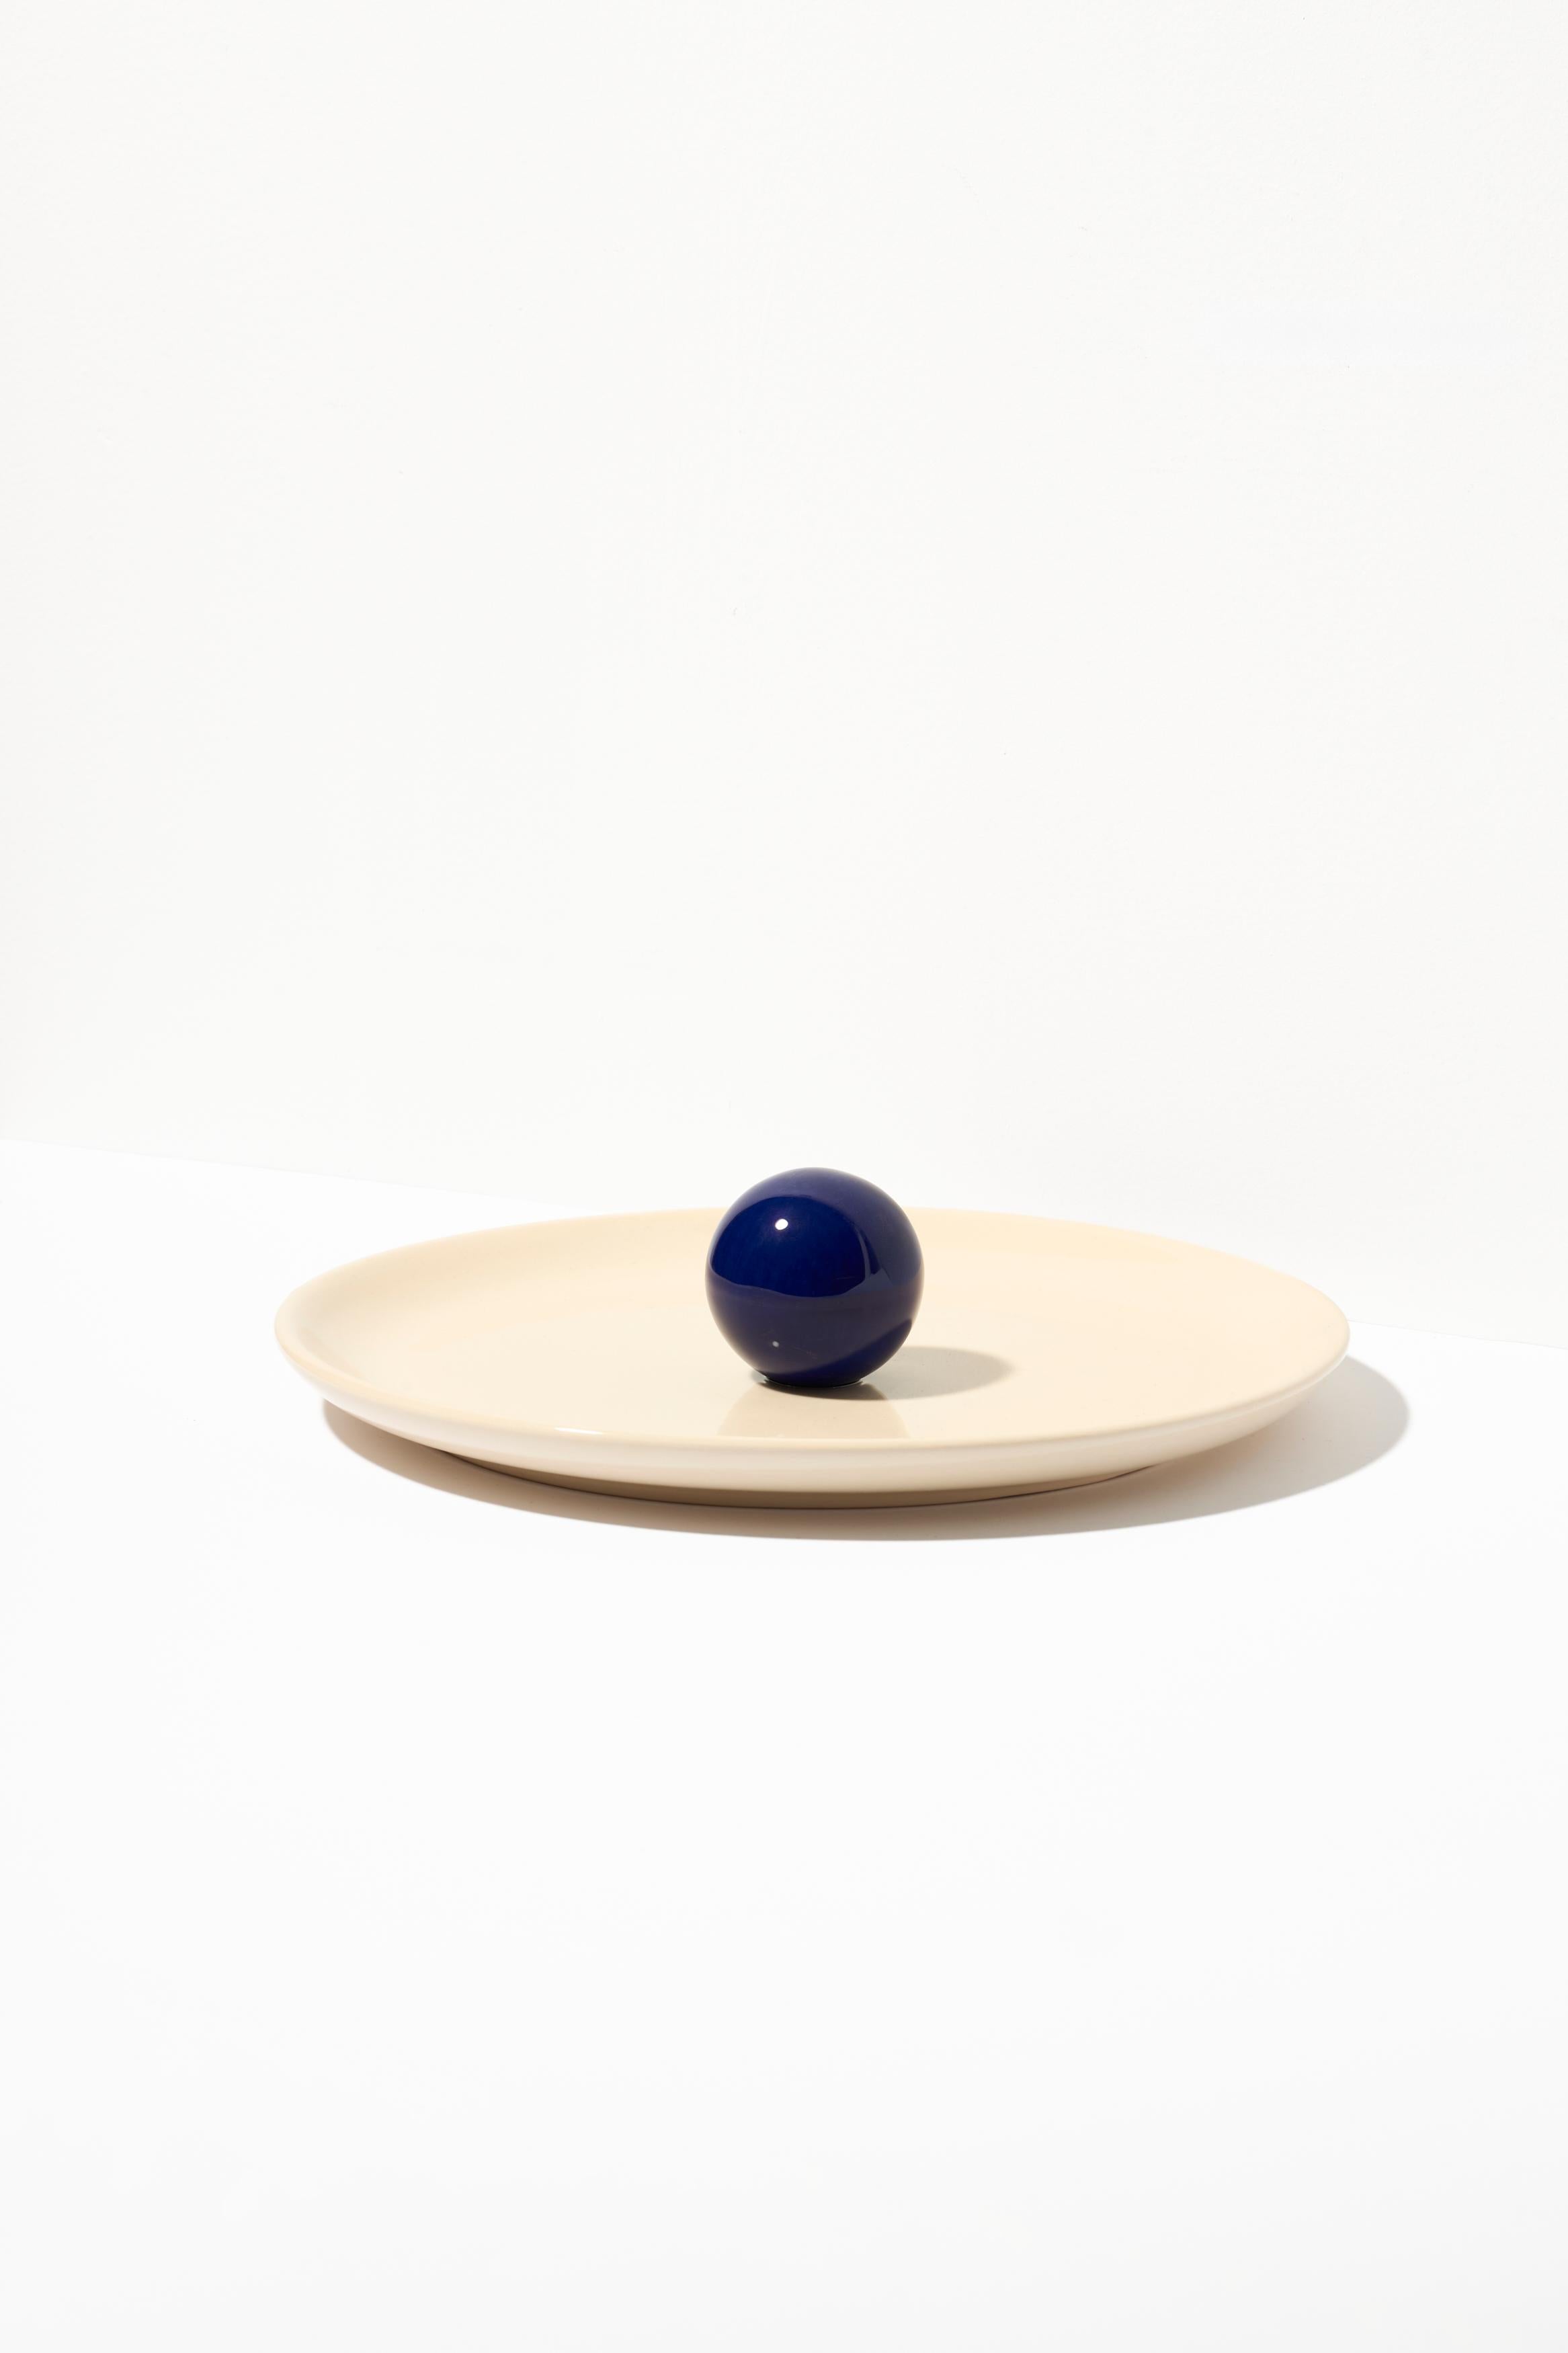 ANIELA can be described in three words: perfect-fruit-plate! Of course, it works just as well for serving sweets or savory snacks. Its wide base and a funny ball-shaped handle gain a distinctive character thanks to the intense glaze color. The